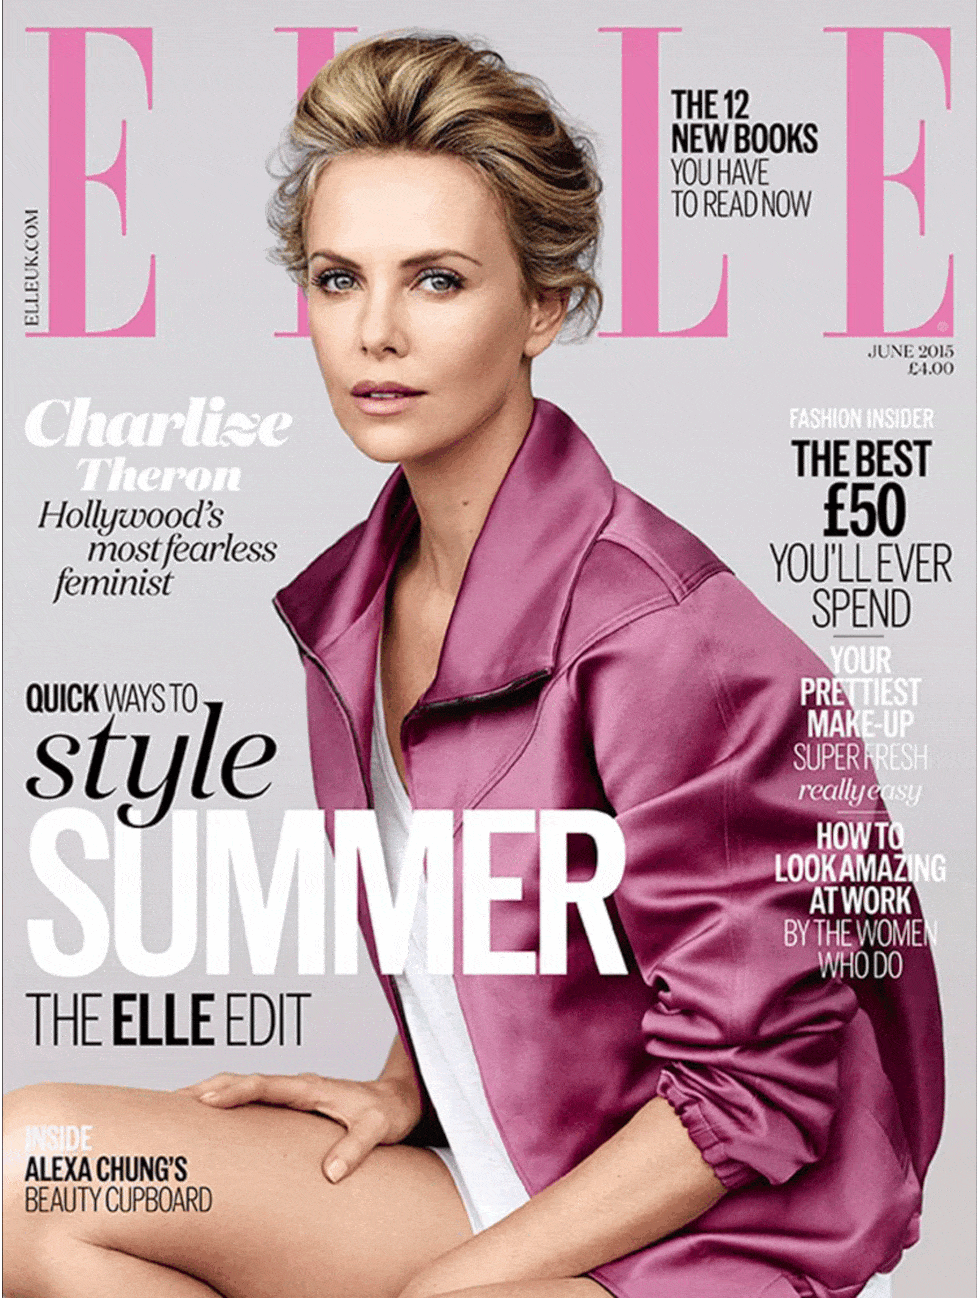 <p>The make-up and hair essentials you need to recreate <a href="http://www.elleuk.com/now-trending/charlize-theron-elle-cover-june-2015">Charlize Theron</a>&#39;s cover look...</p>